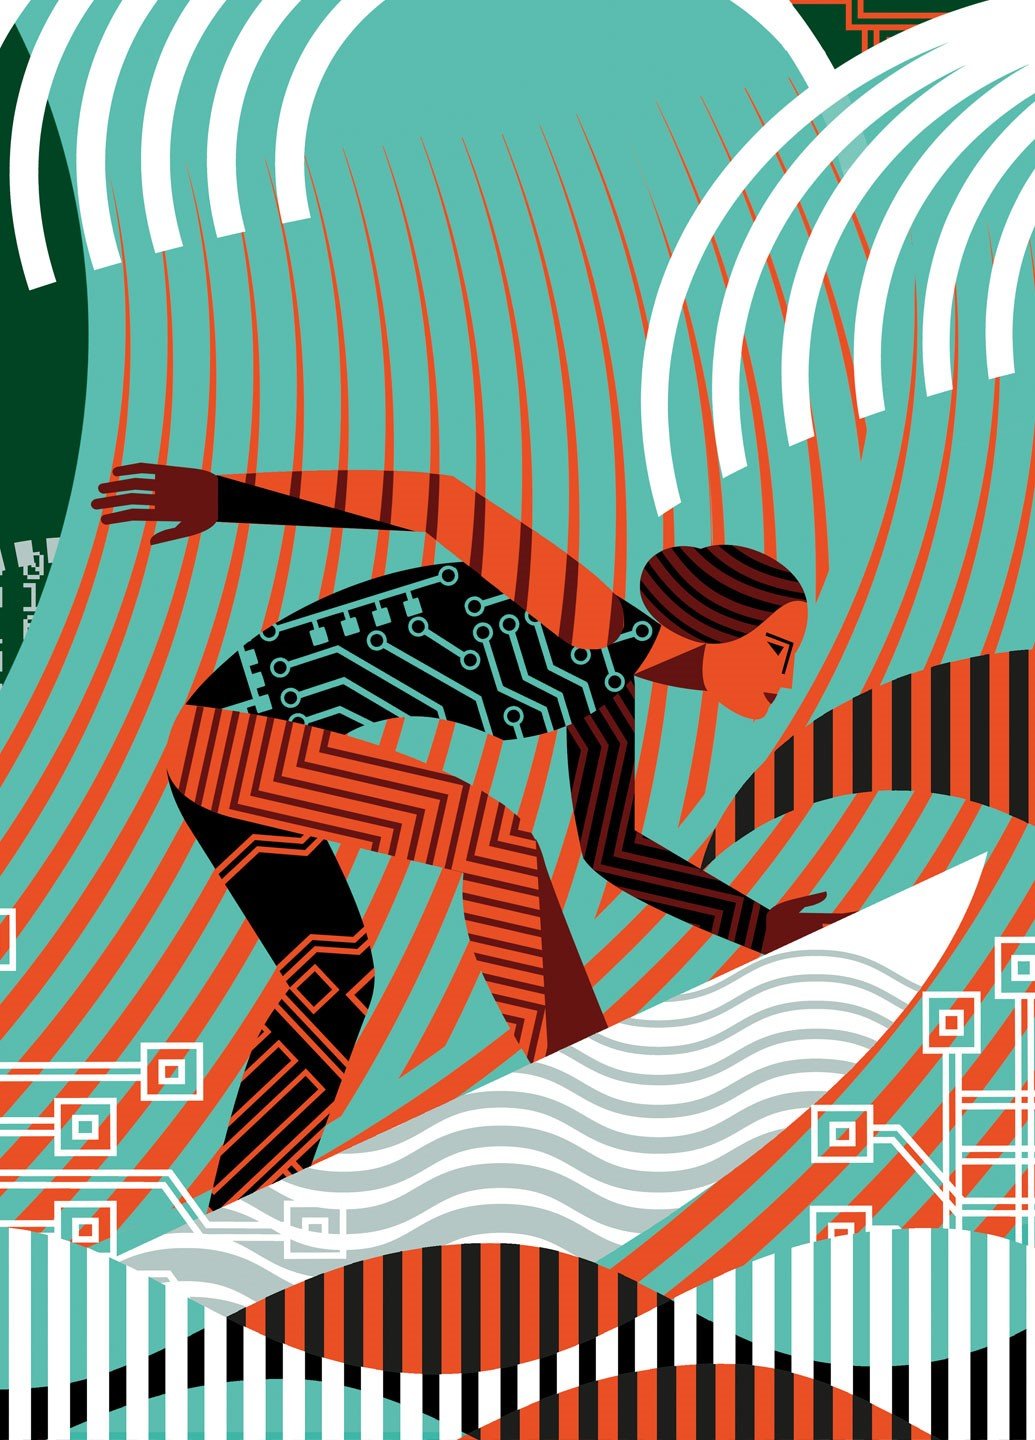 Illustrations by Balbusso Twins of a woman surfing.